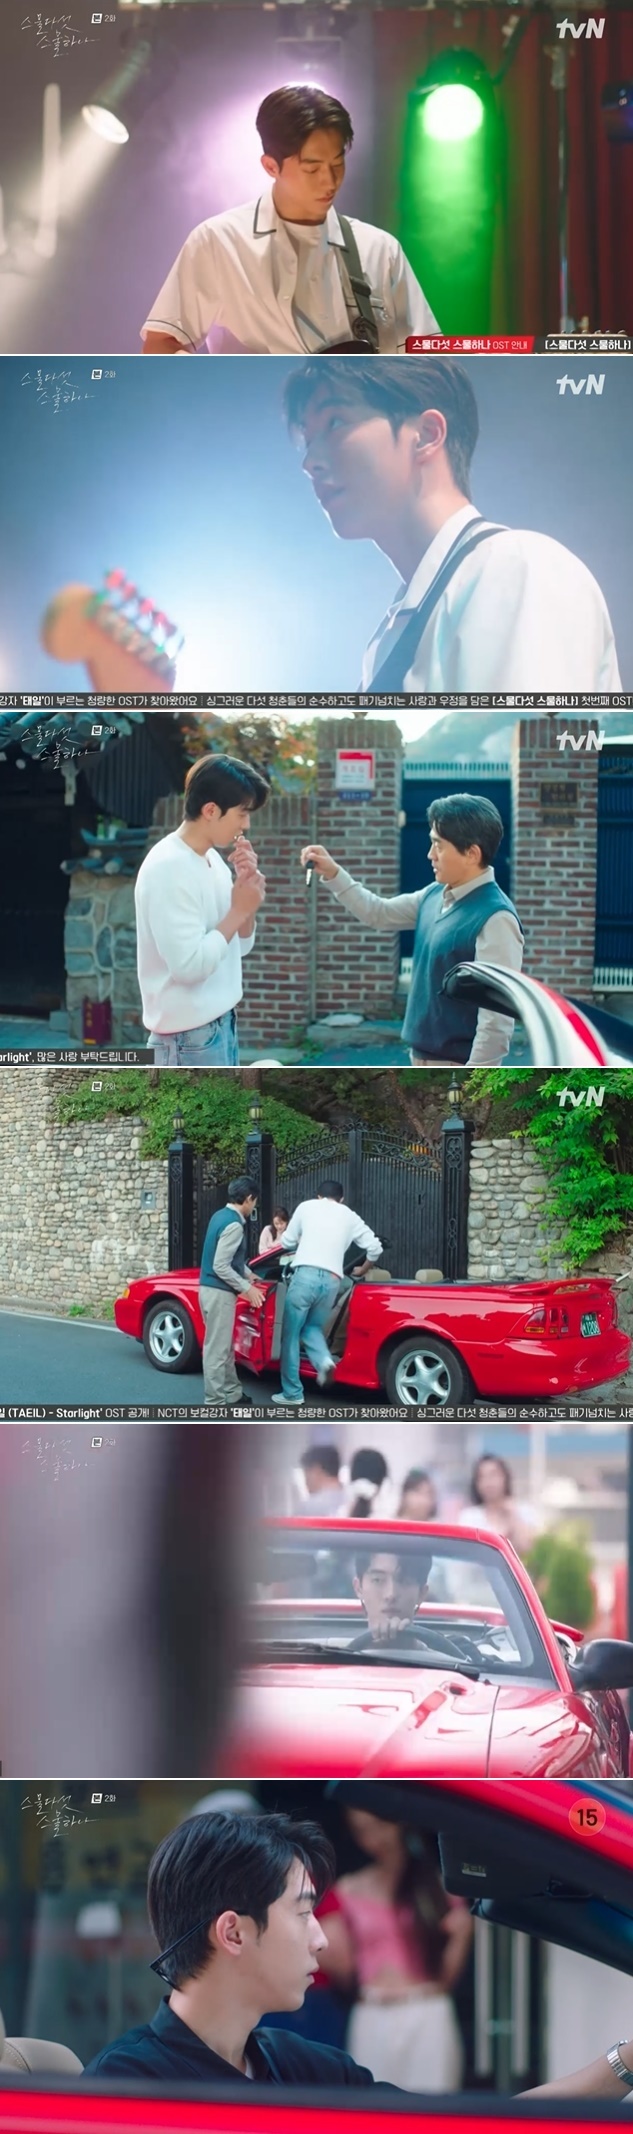 Nam Joo-hyuk was shown playing guitar in uniform, which made him warm.In the second episode of TVNs new Saturday, Drama Twenty Five Twenty One (playplay by Kwon Do-eun/directed by Jung Ji-hyun/produced by Hwa-An-dam Pictures), which aired on February 13, Na Hee-do (Kim Tae-ri), whose fencing department was missing due to the IMF, was shown transferring to a solar high school with a dream and long-awaited fencing state representative, Bona ...Na Hee-do, who stopped by the Sun High Broadcasting Group on the day, heard a tape of the voice that was broadcast while Lee Jin (Nam Joo-hyuk) was in the broadcasting group during his school days.Then a recollection of the past of Lee Jin was made public: the look of Lee Jin, wearing uniforms and playing guitar, caught the attention of viewers.Then, a college student, Lee Jin, received a red sports car from his father and walked the streets of Appgujeong.